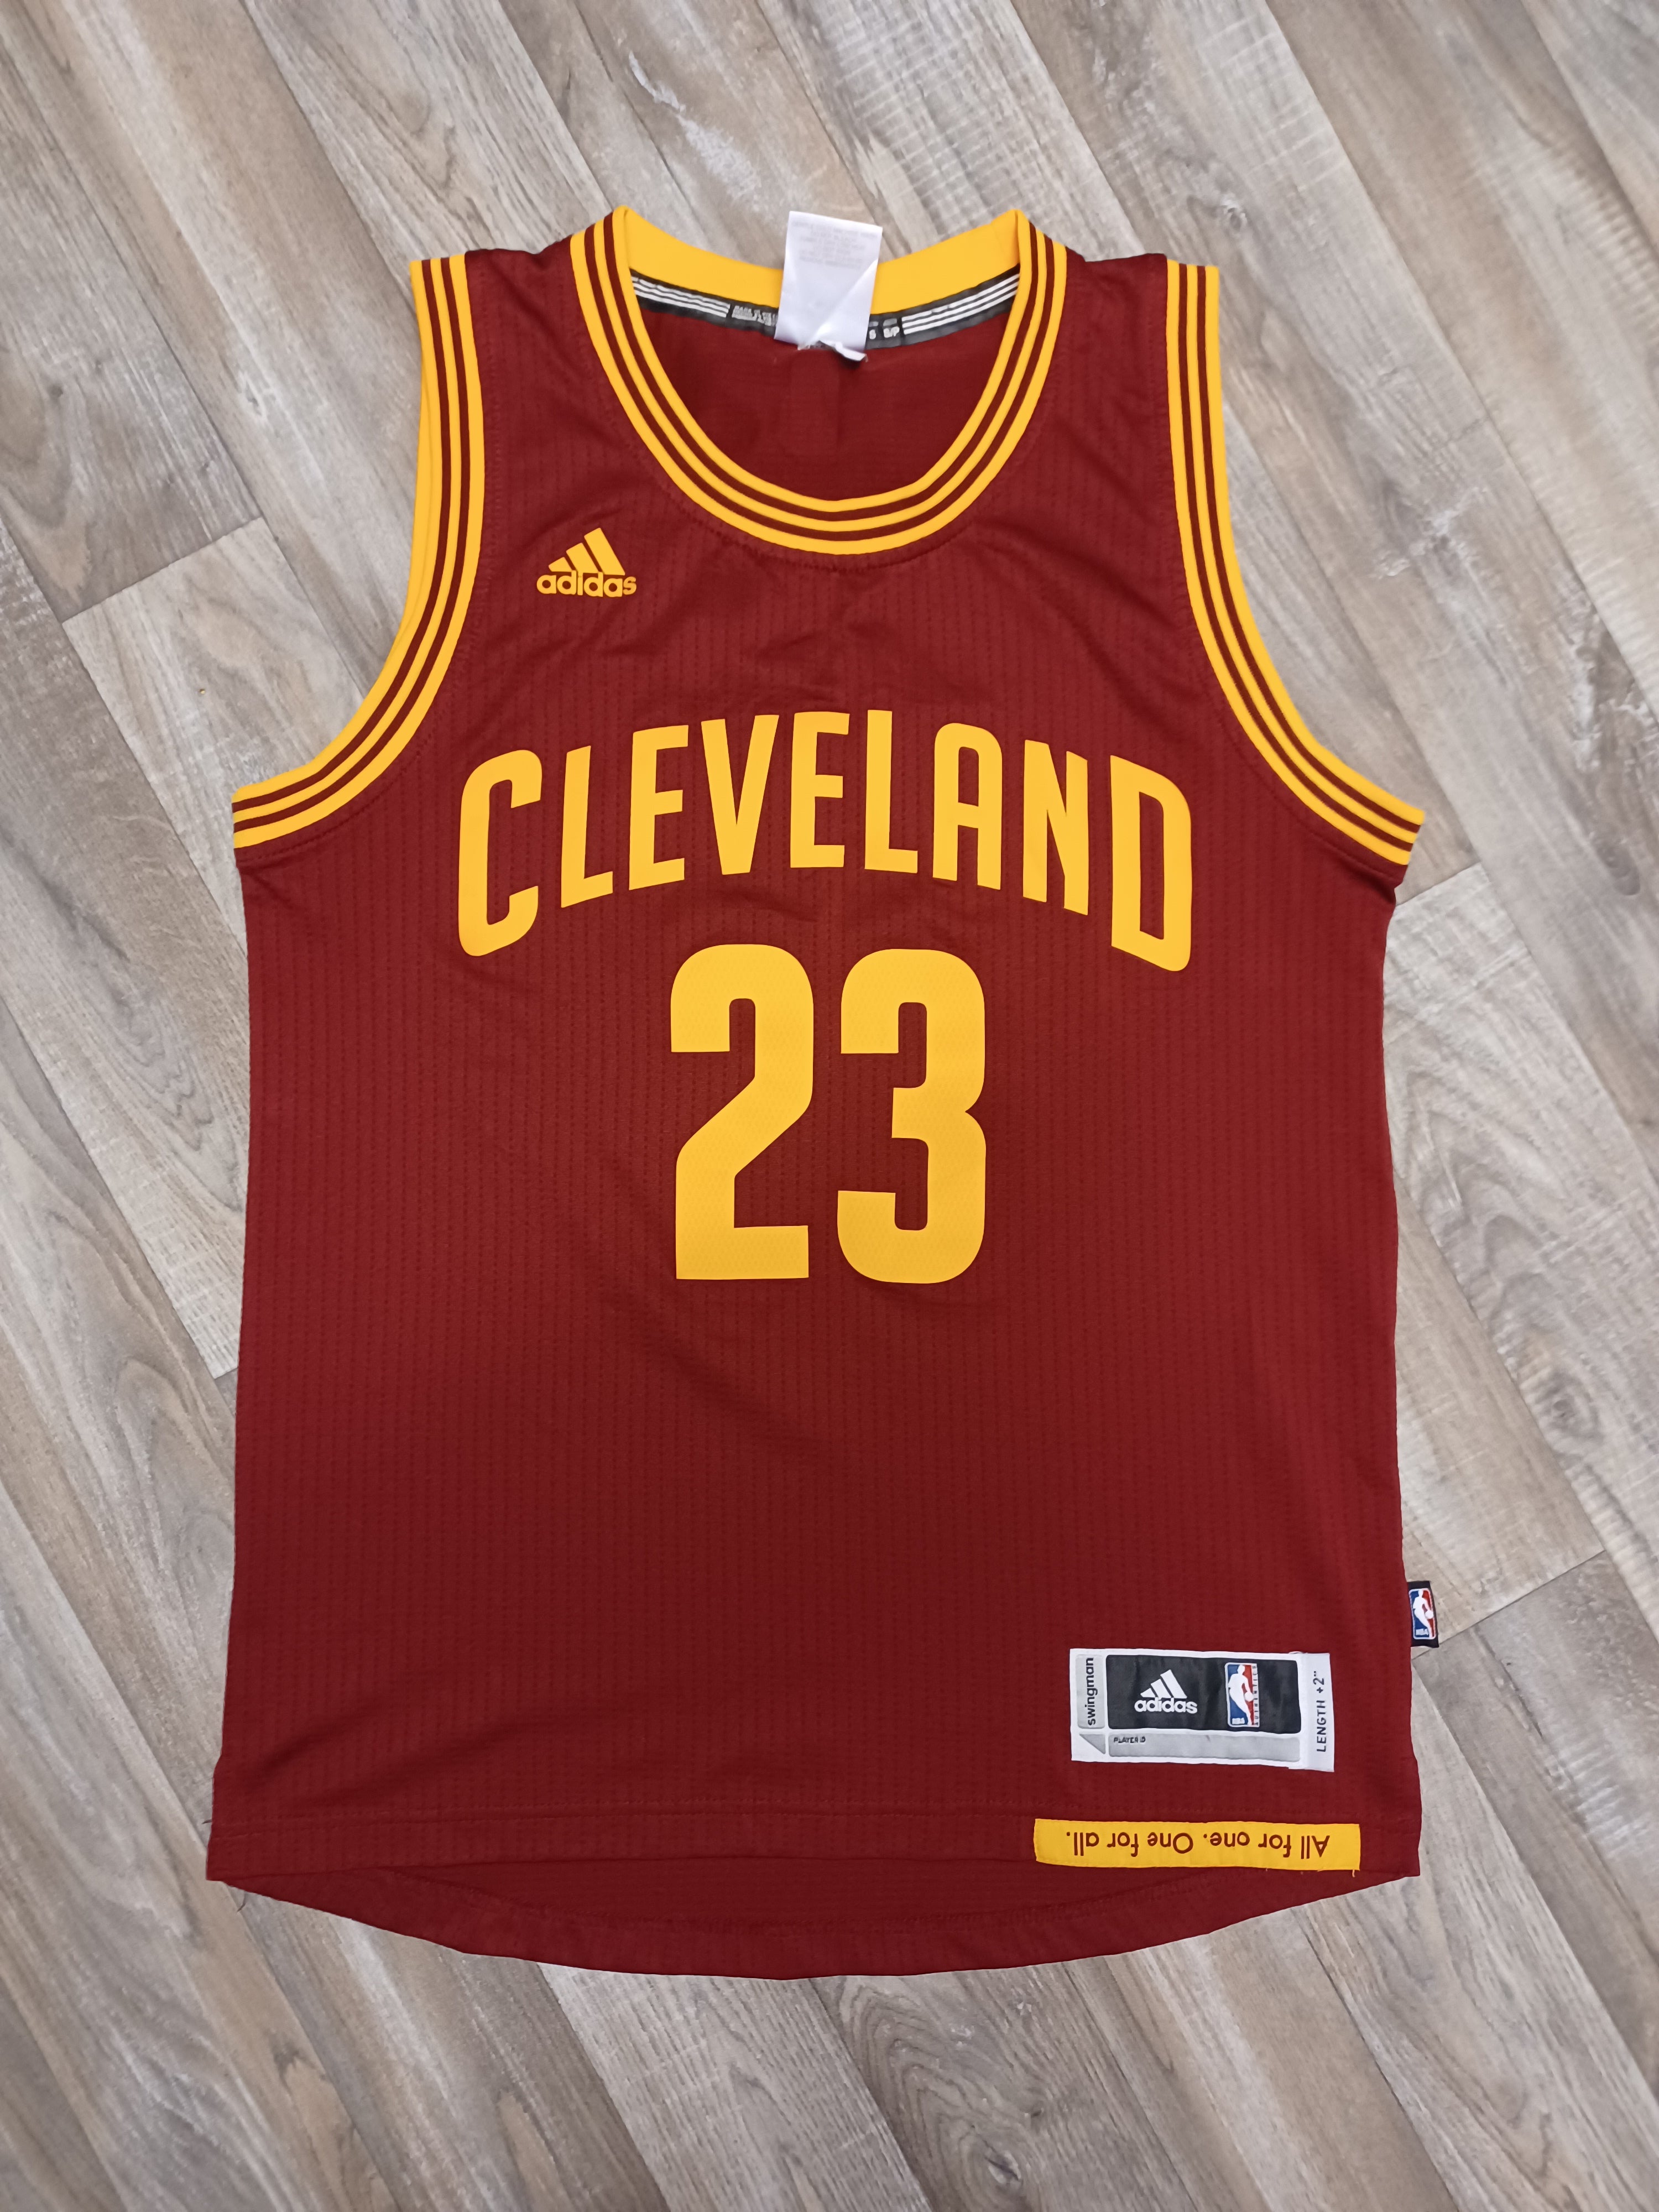 Cleveland Cavaliers Basketball Jersey #90 Youth Large 14/16 Drew